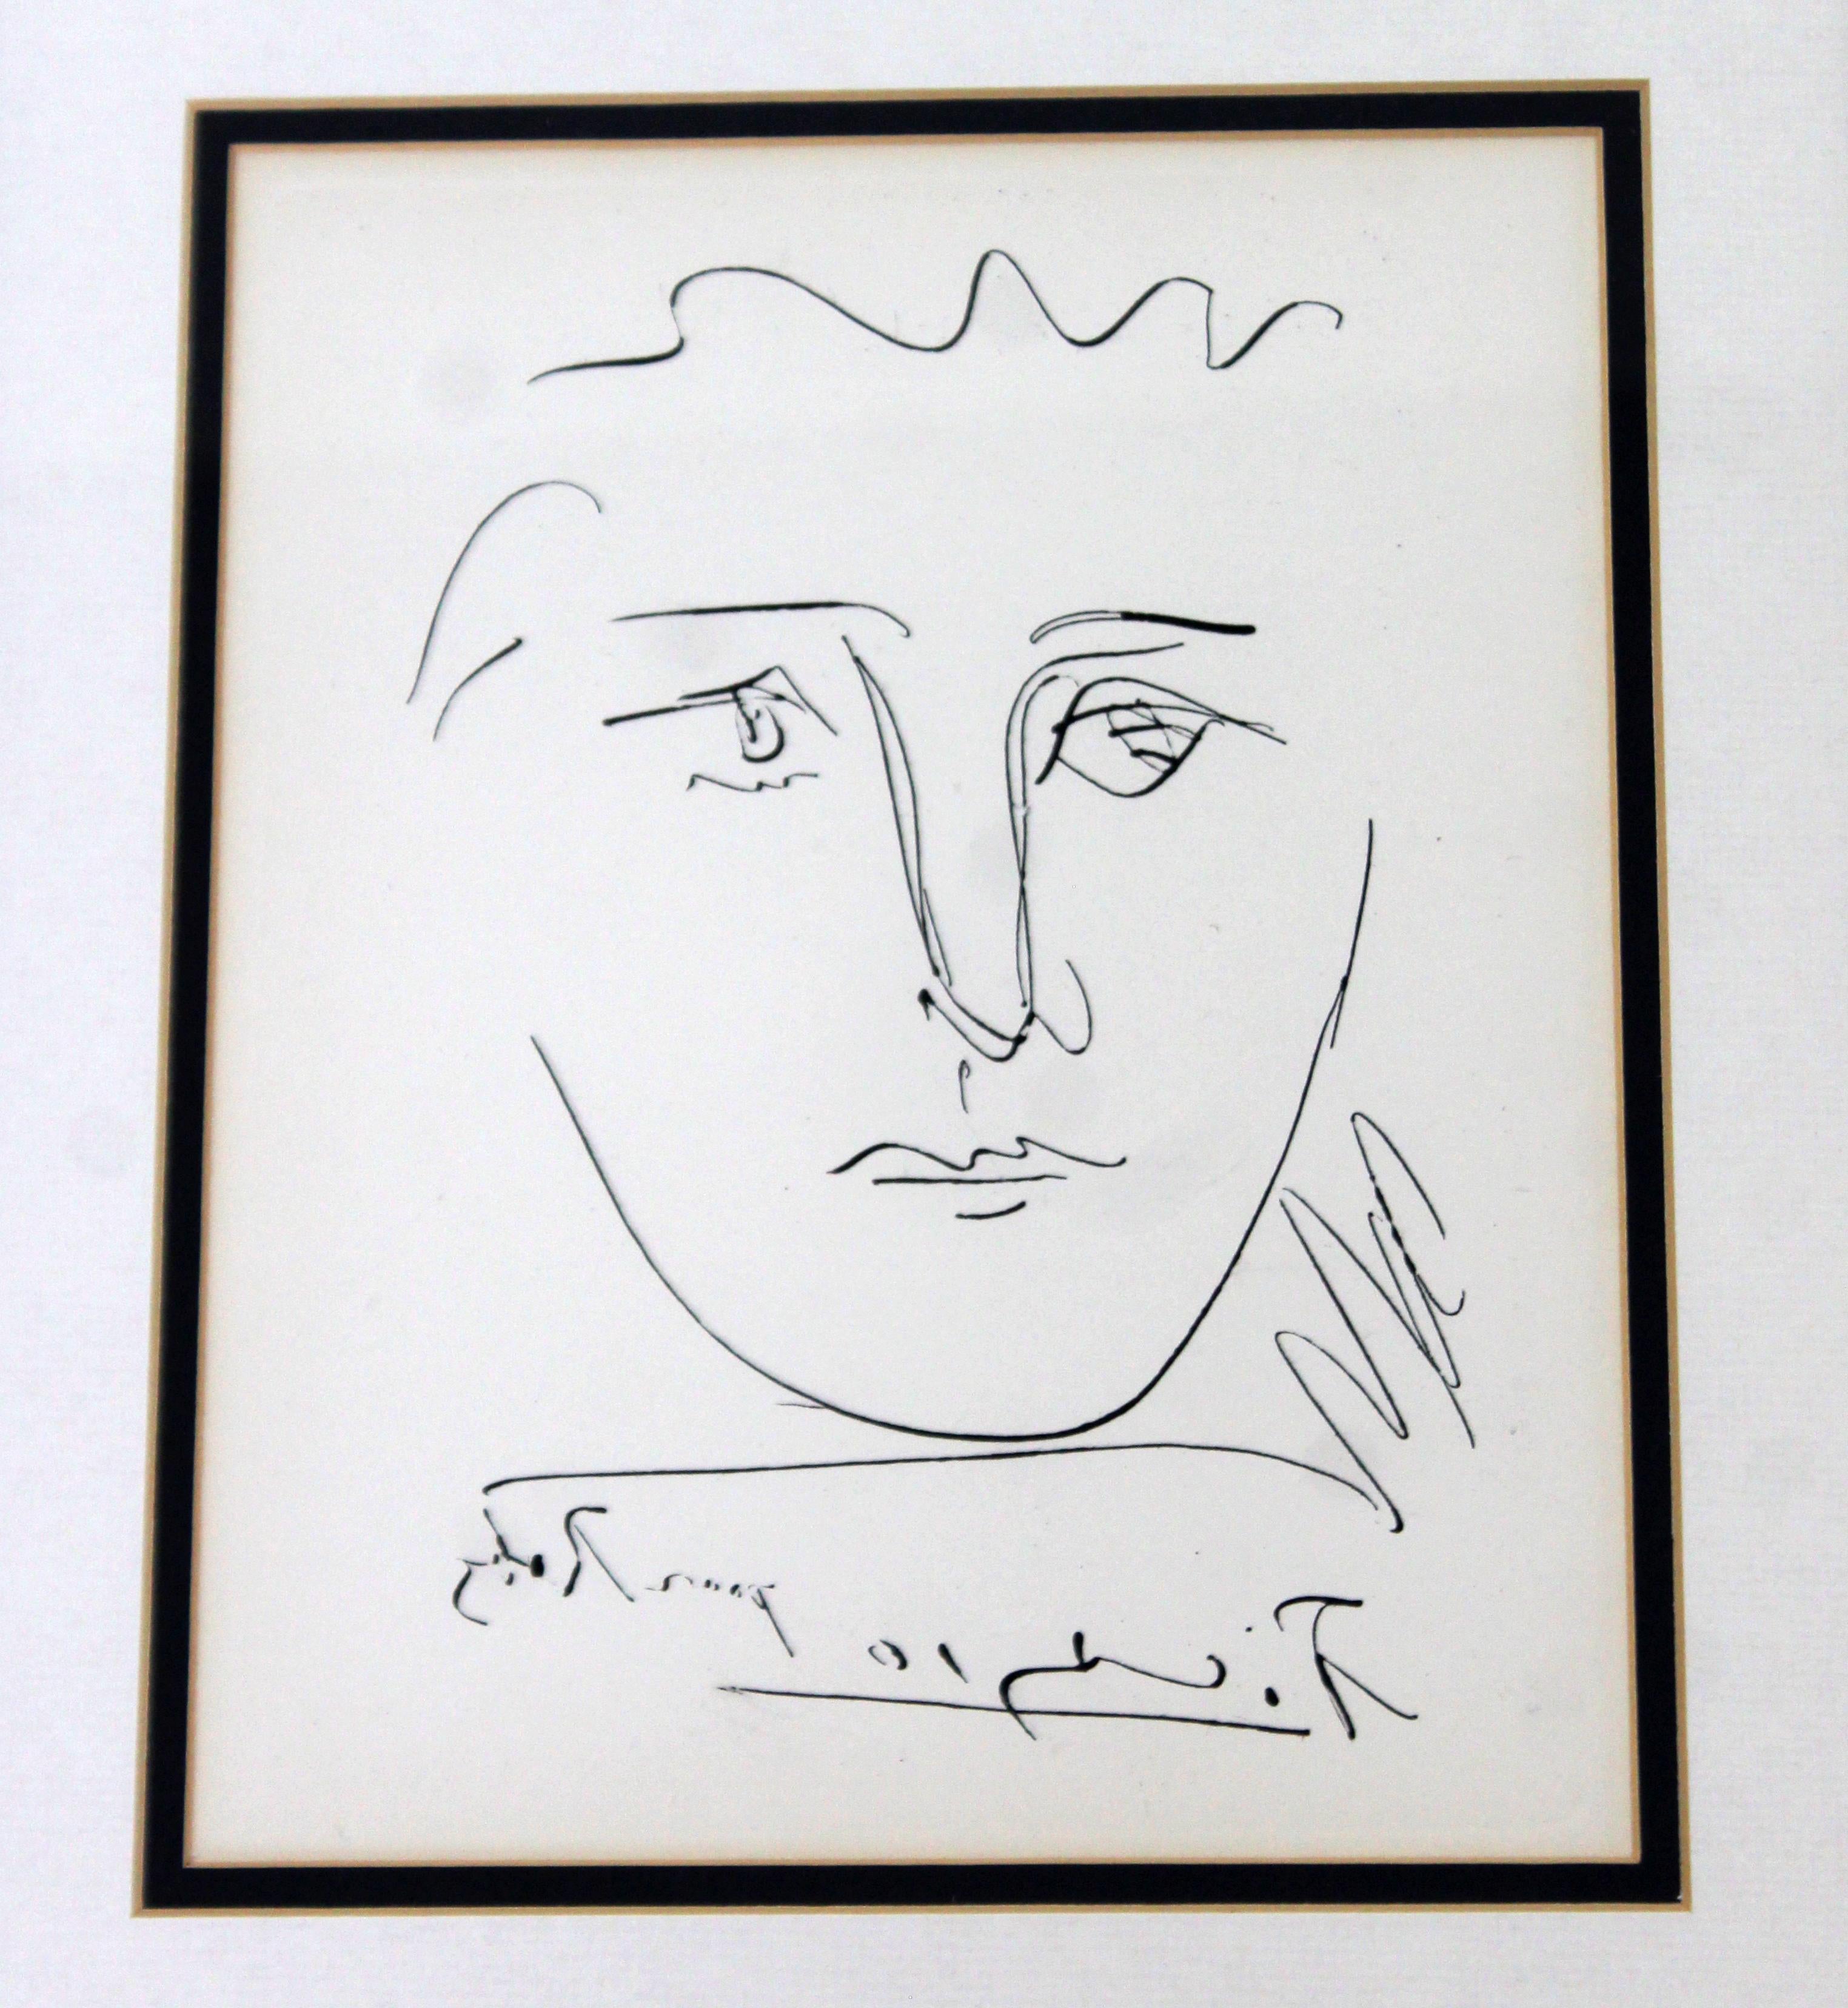 For your consideration, is an original, signed in plate etching, by Pablo Picasso, in black frame. Picasso is best known for printmaking, paintings, ceramics and as a poet who spent most of his adult life in France. In excellent condition. Measures: